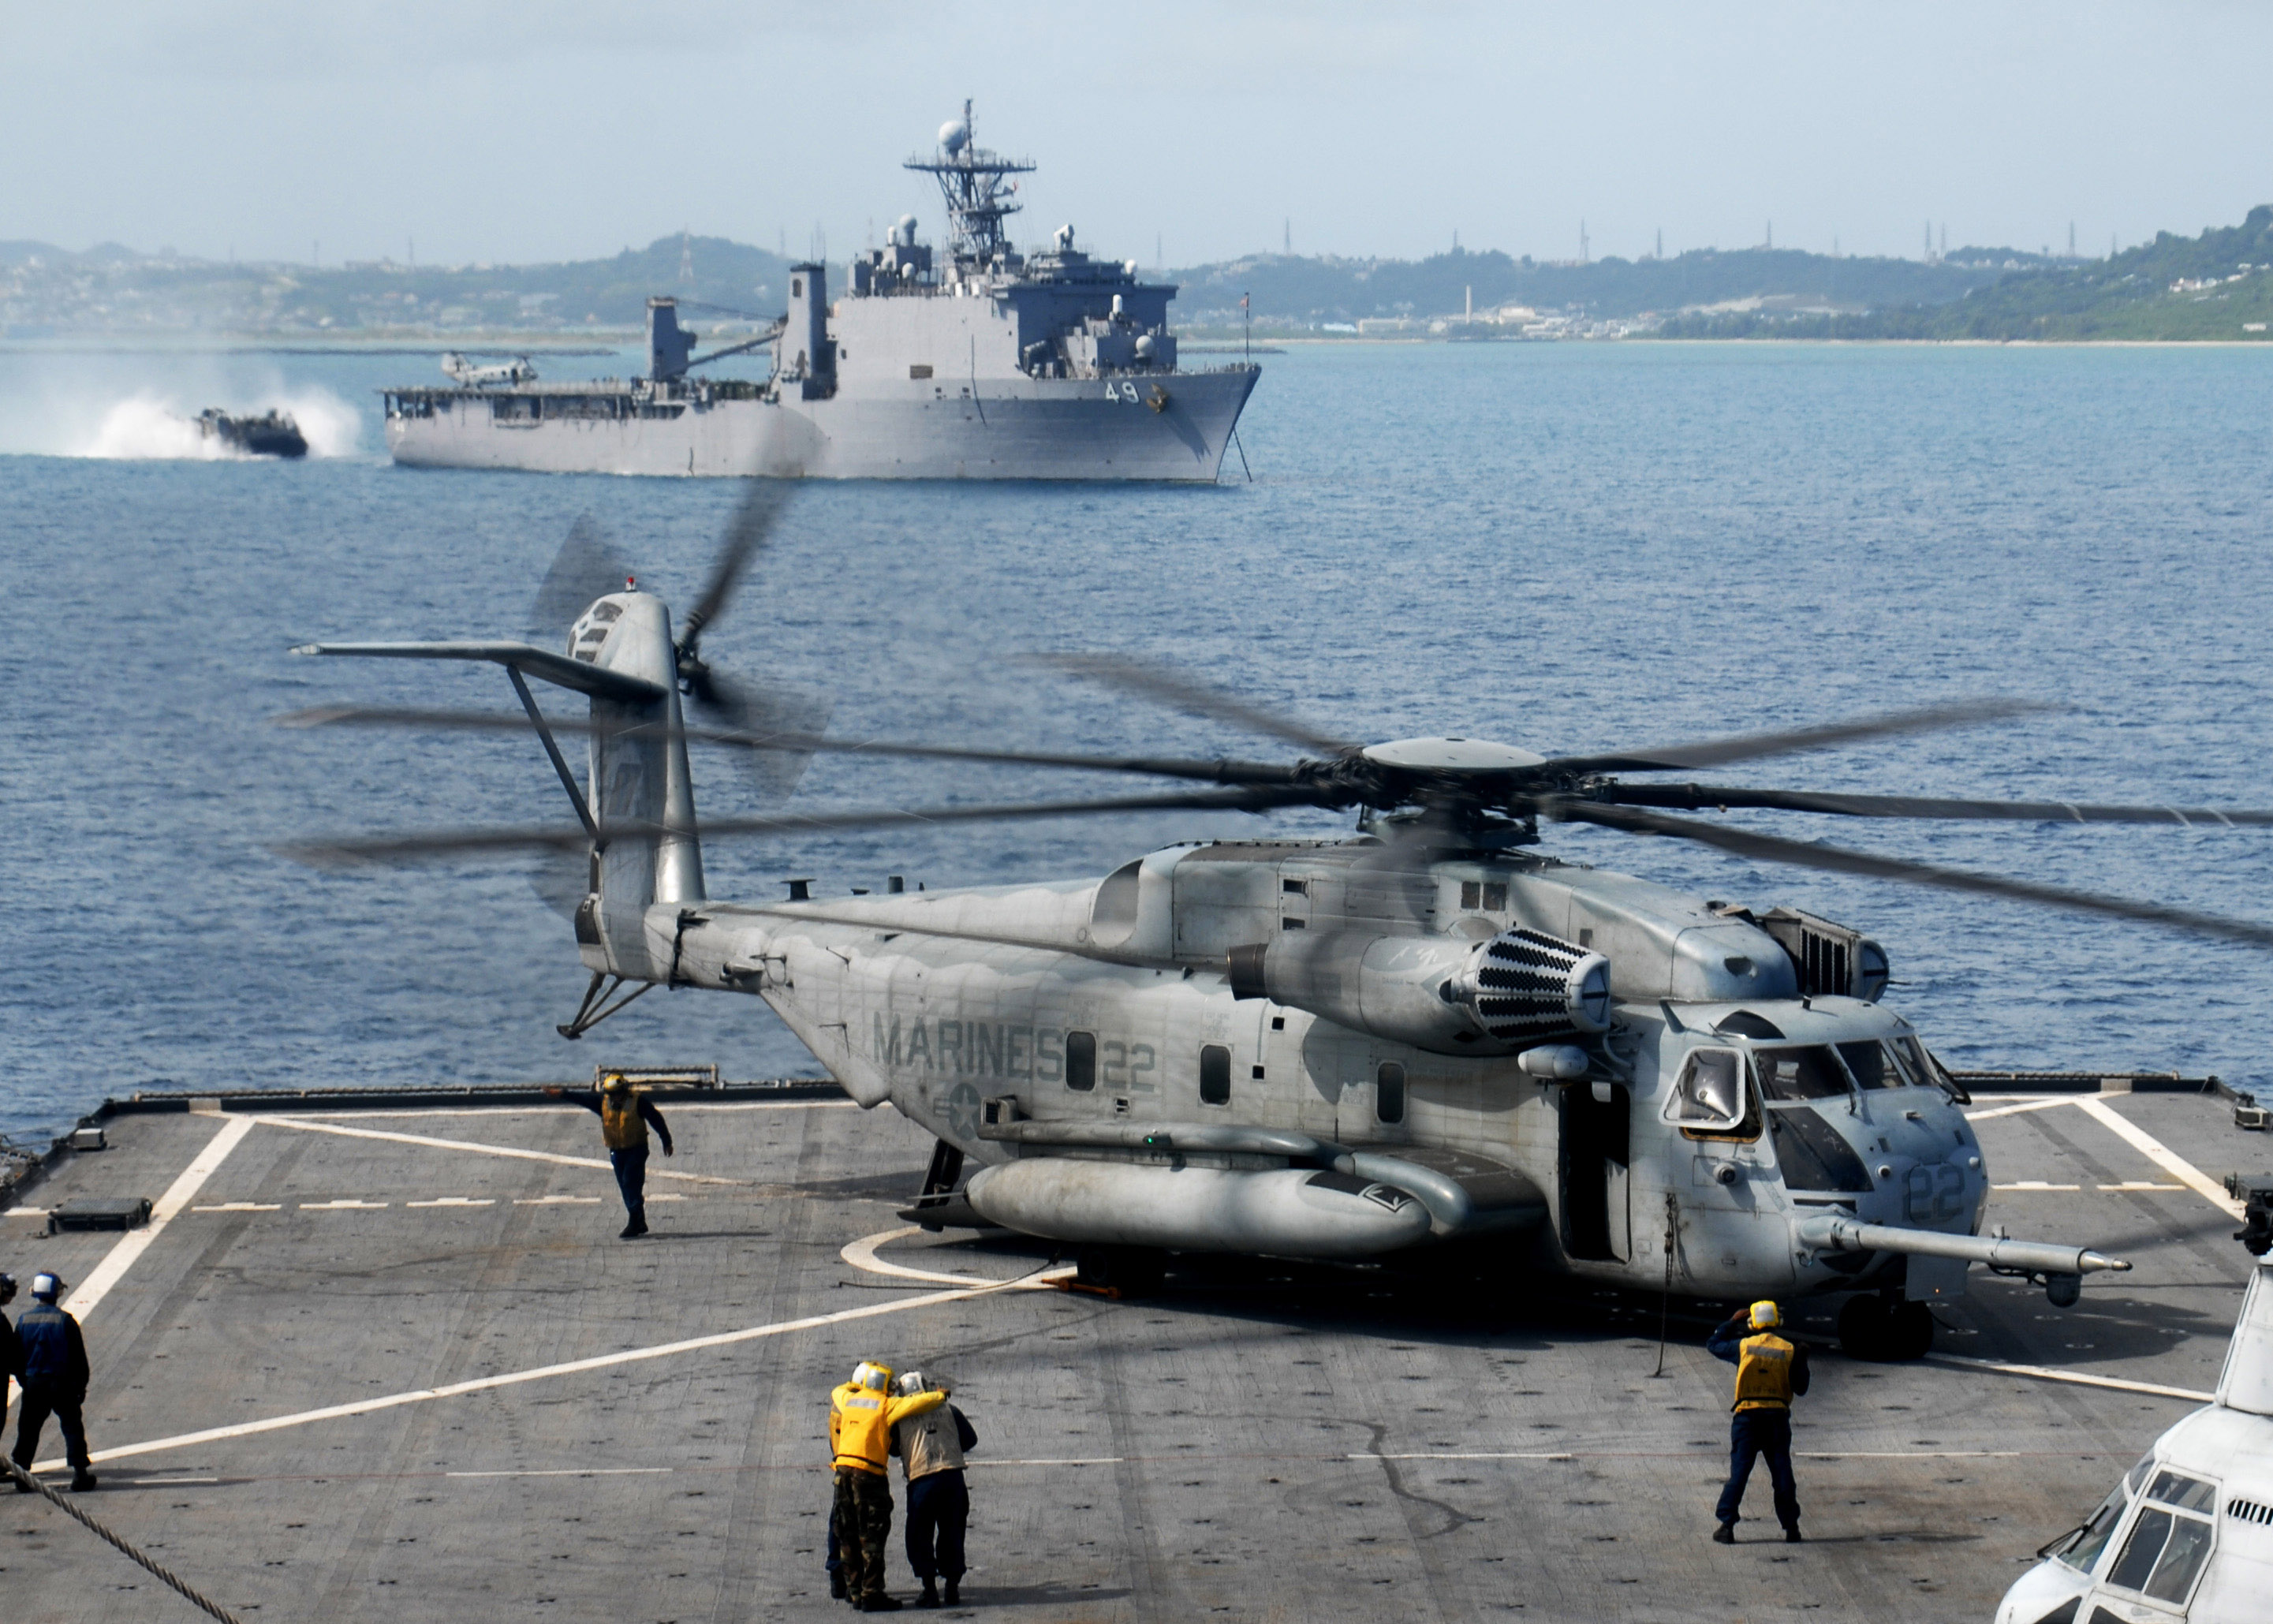 US_Navy_090930-N-6692A-072_Sailors_aboard_the_amphibious_dock_landing_ship_USS_Tortuga_%28LSD_46%29_tend_to_a_Marine_Corps_CH-53_Sea_Stallion_helicopter_during_flight_operations.jpg